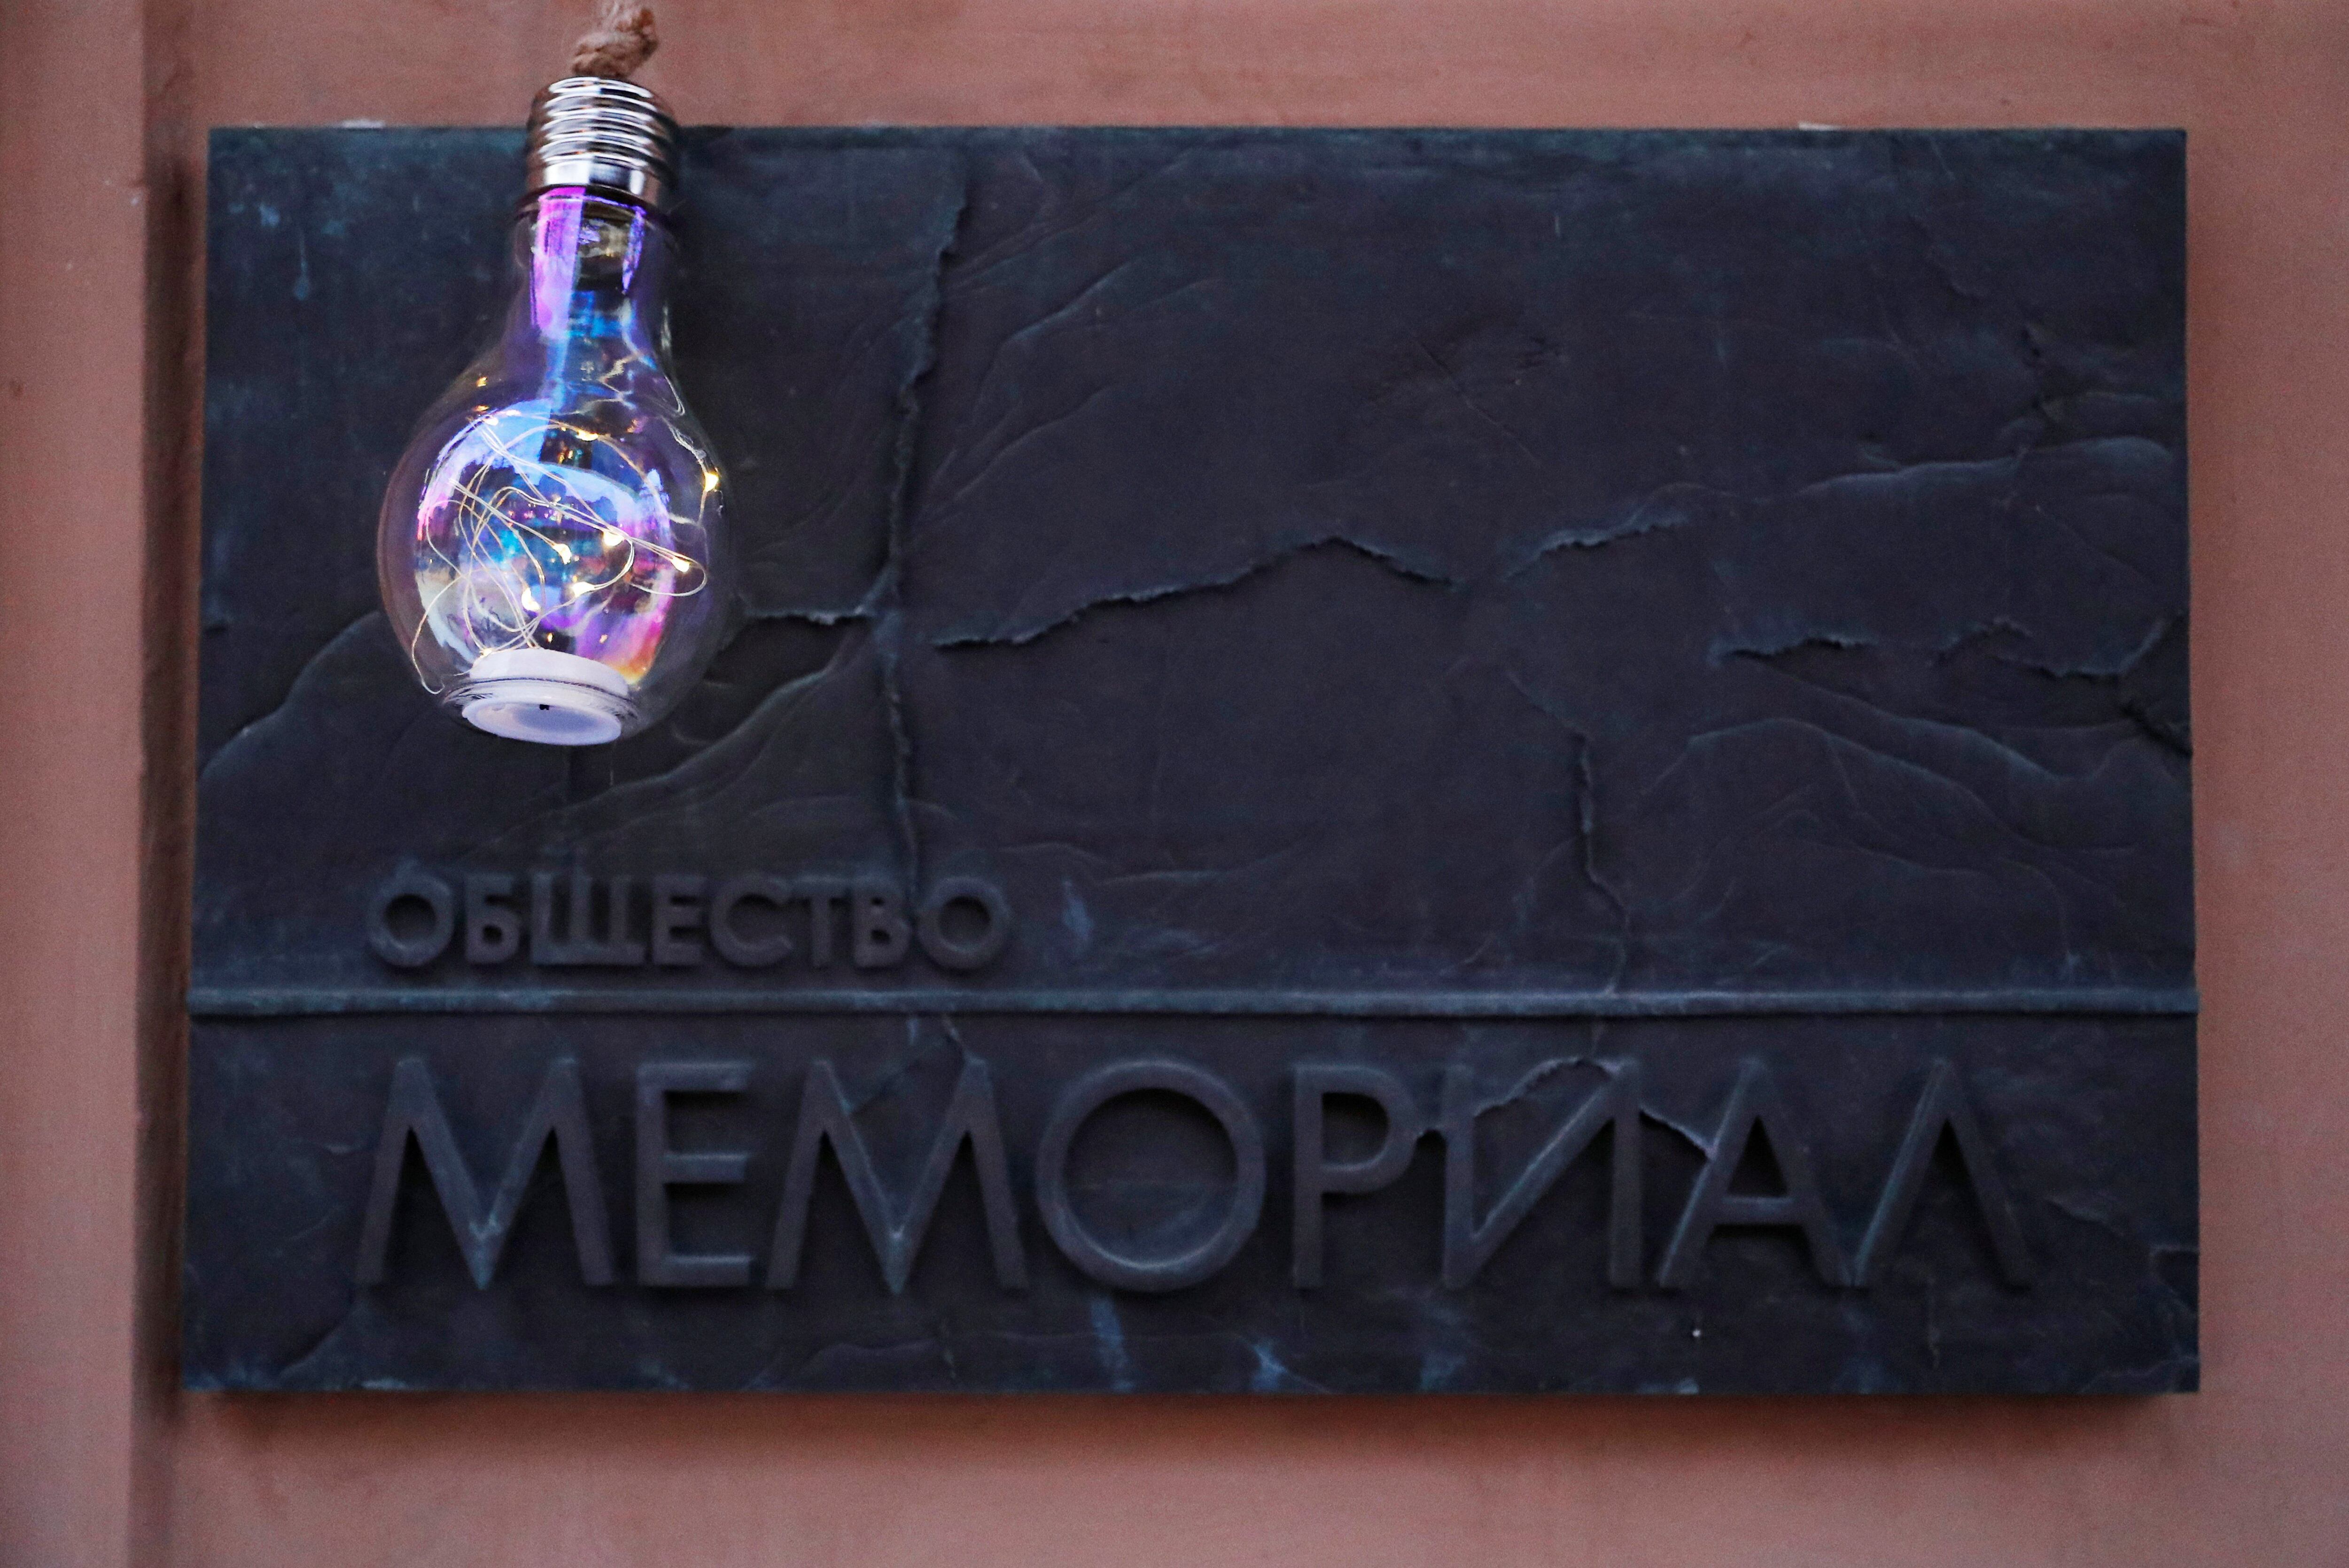 Memorial documents and keeps alive the memory of 